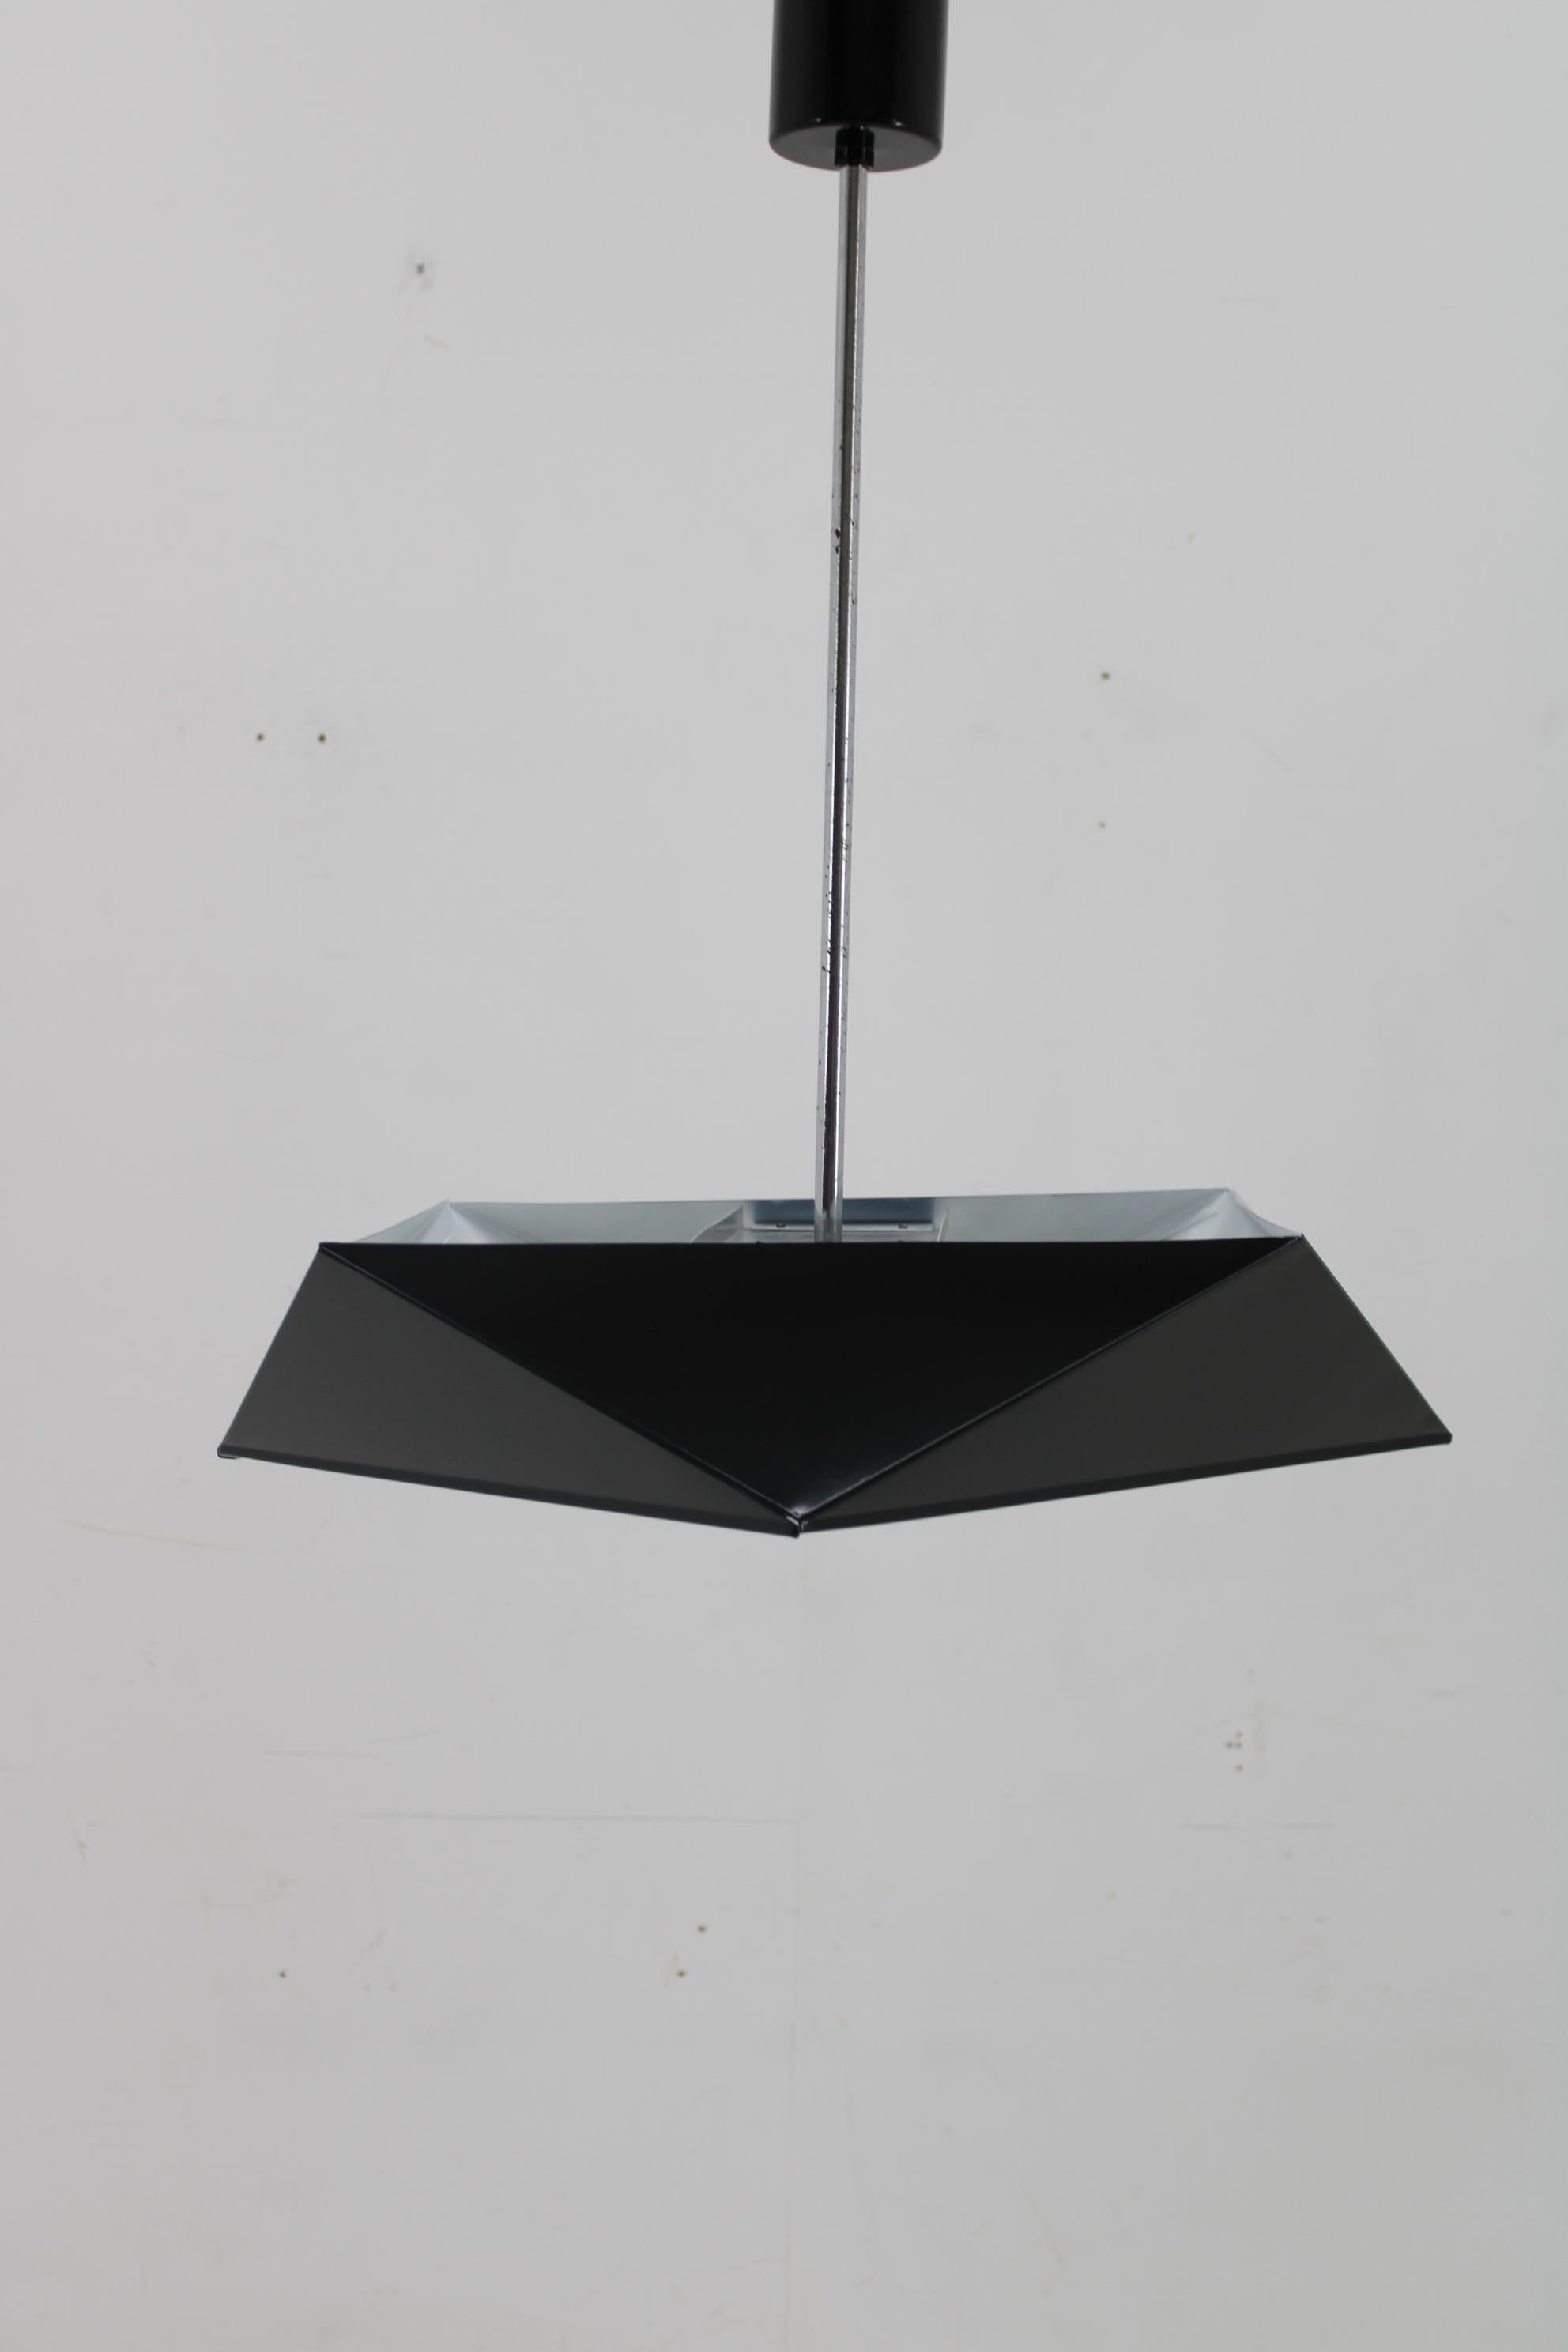 1970s Josef Hurka Rare Geometric Pendant Lamp for Napako, 6 items available In Good Condition For Sale In Praha, CZ